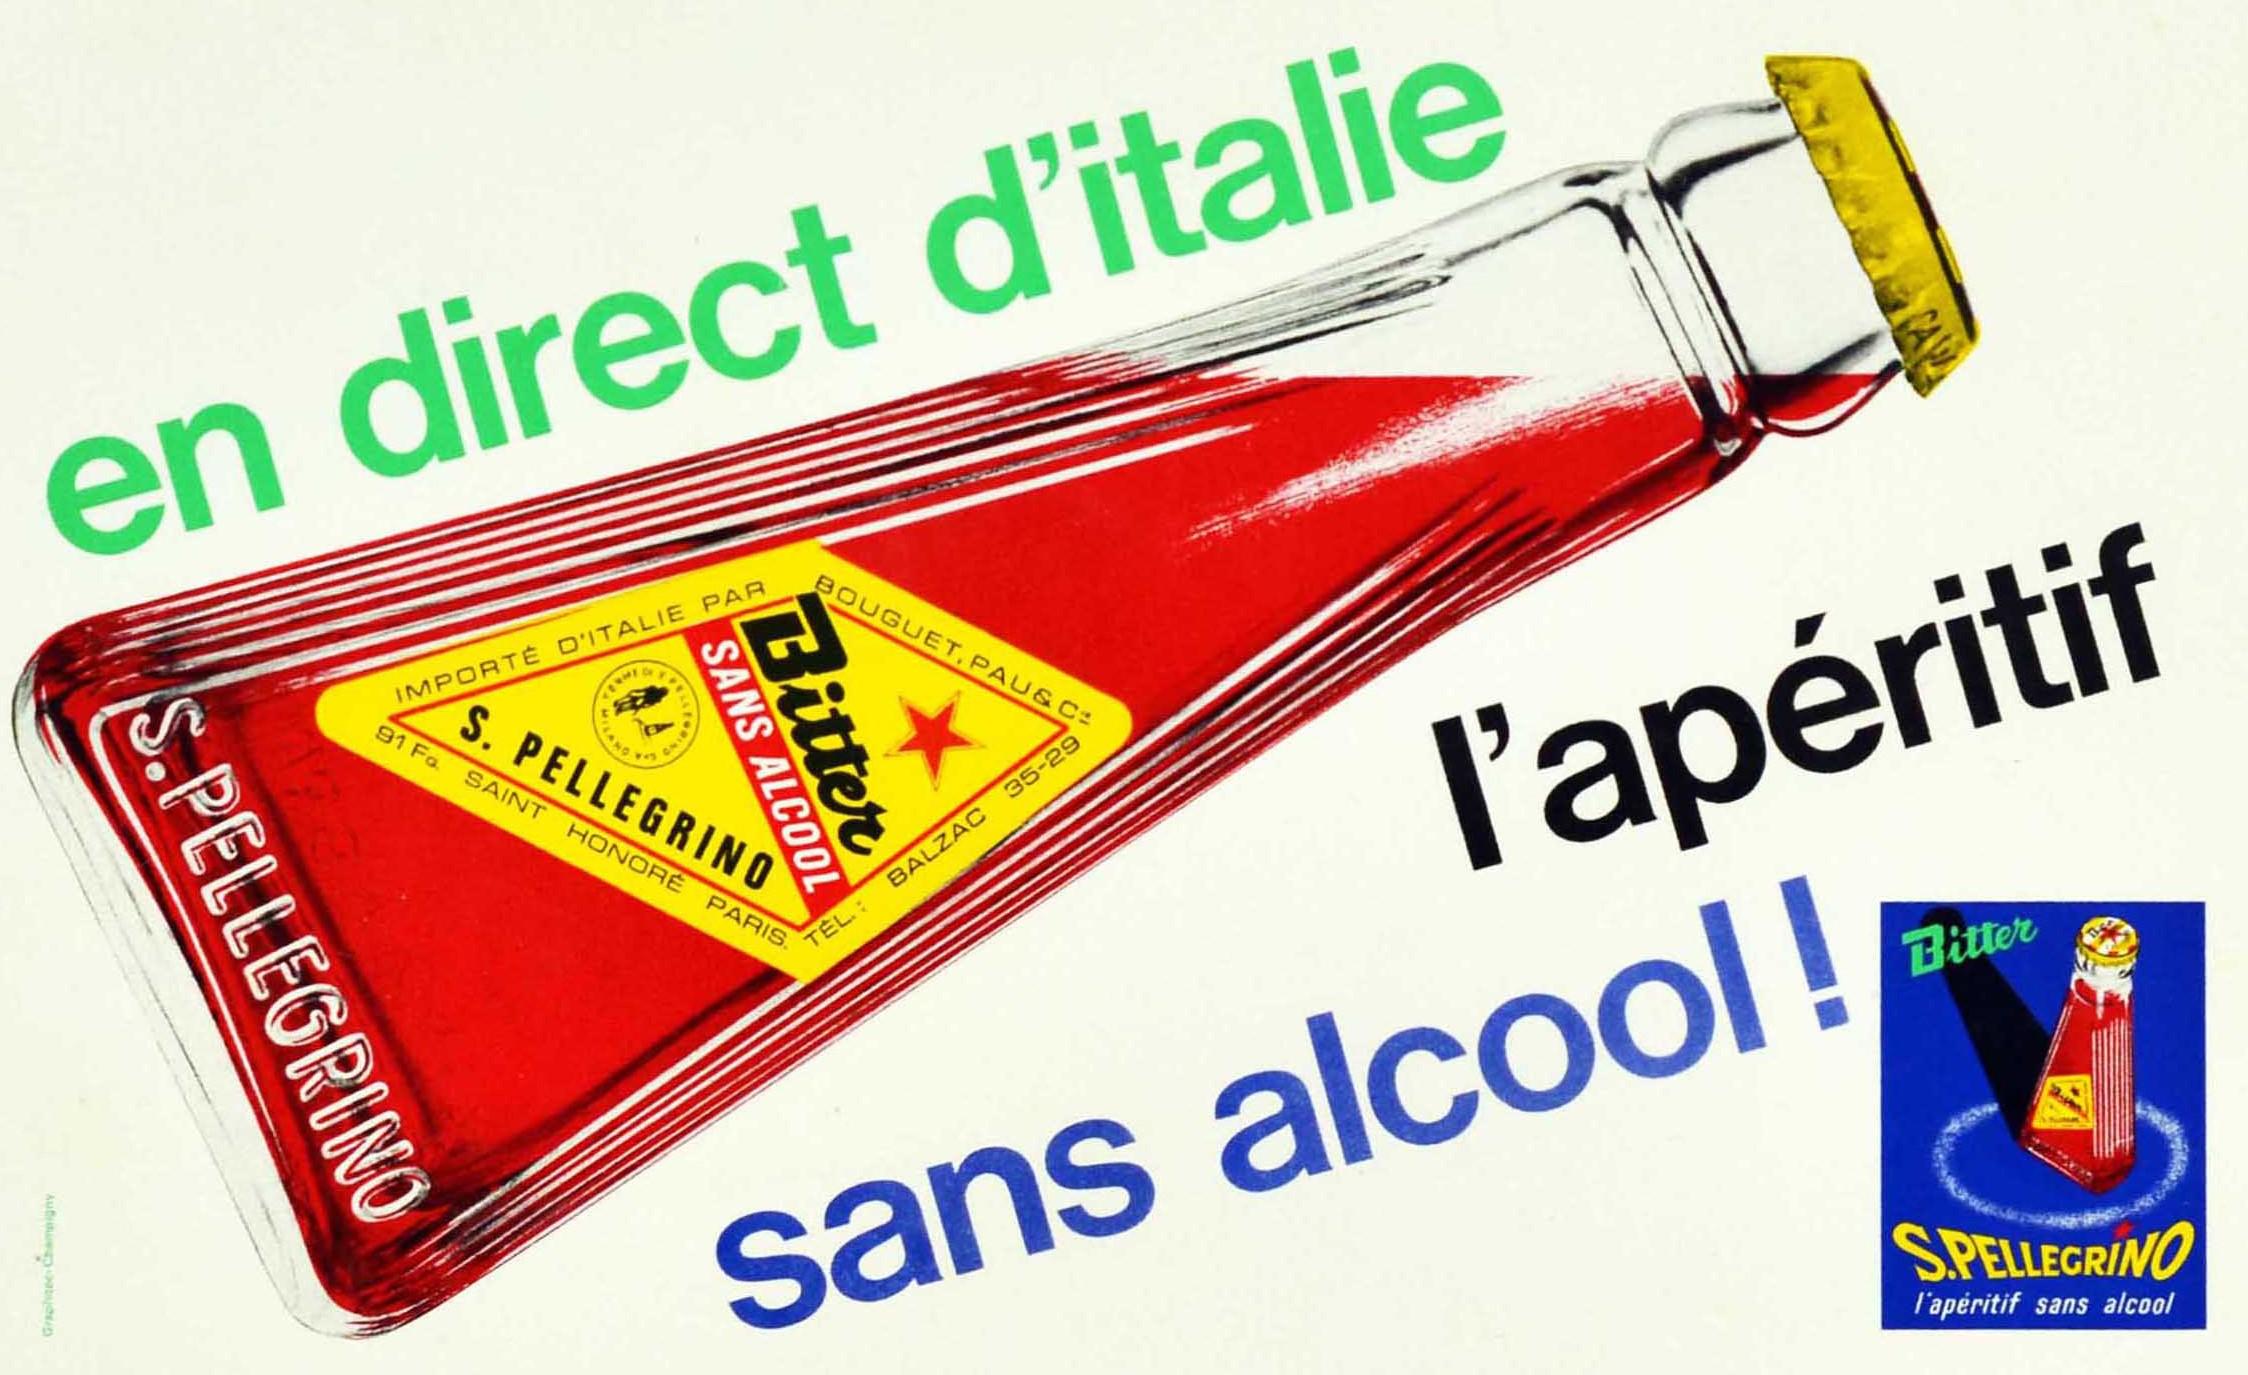 Original Vintage Drink Poster For San Pellegrino Bitter Aperitif Without Alcohol In Good Condition For Sale In London, GB